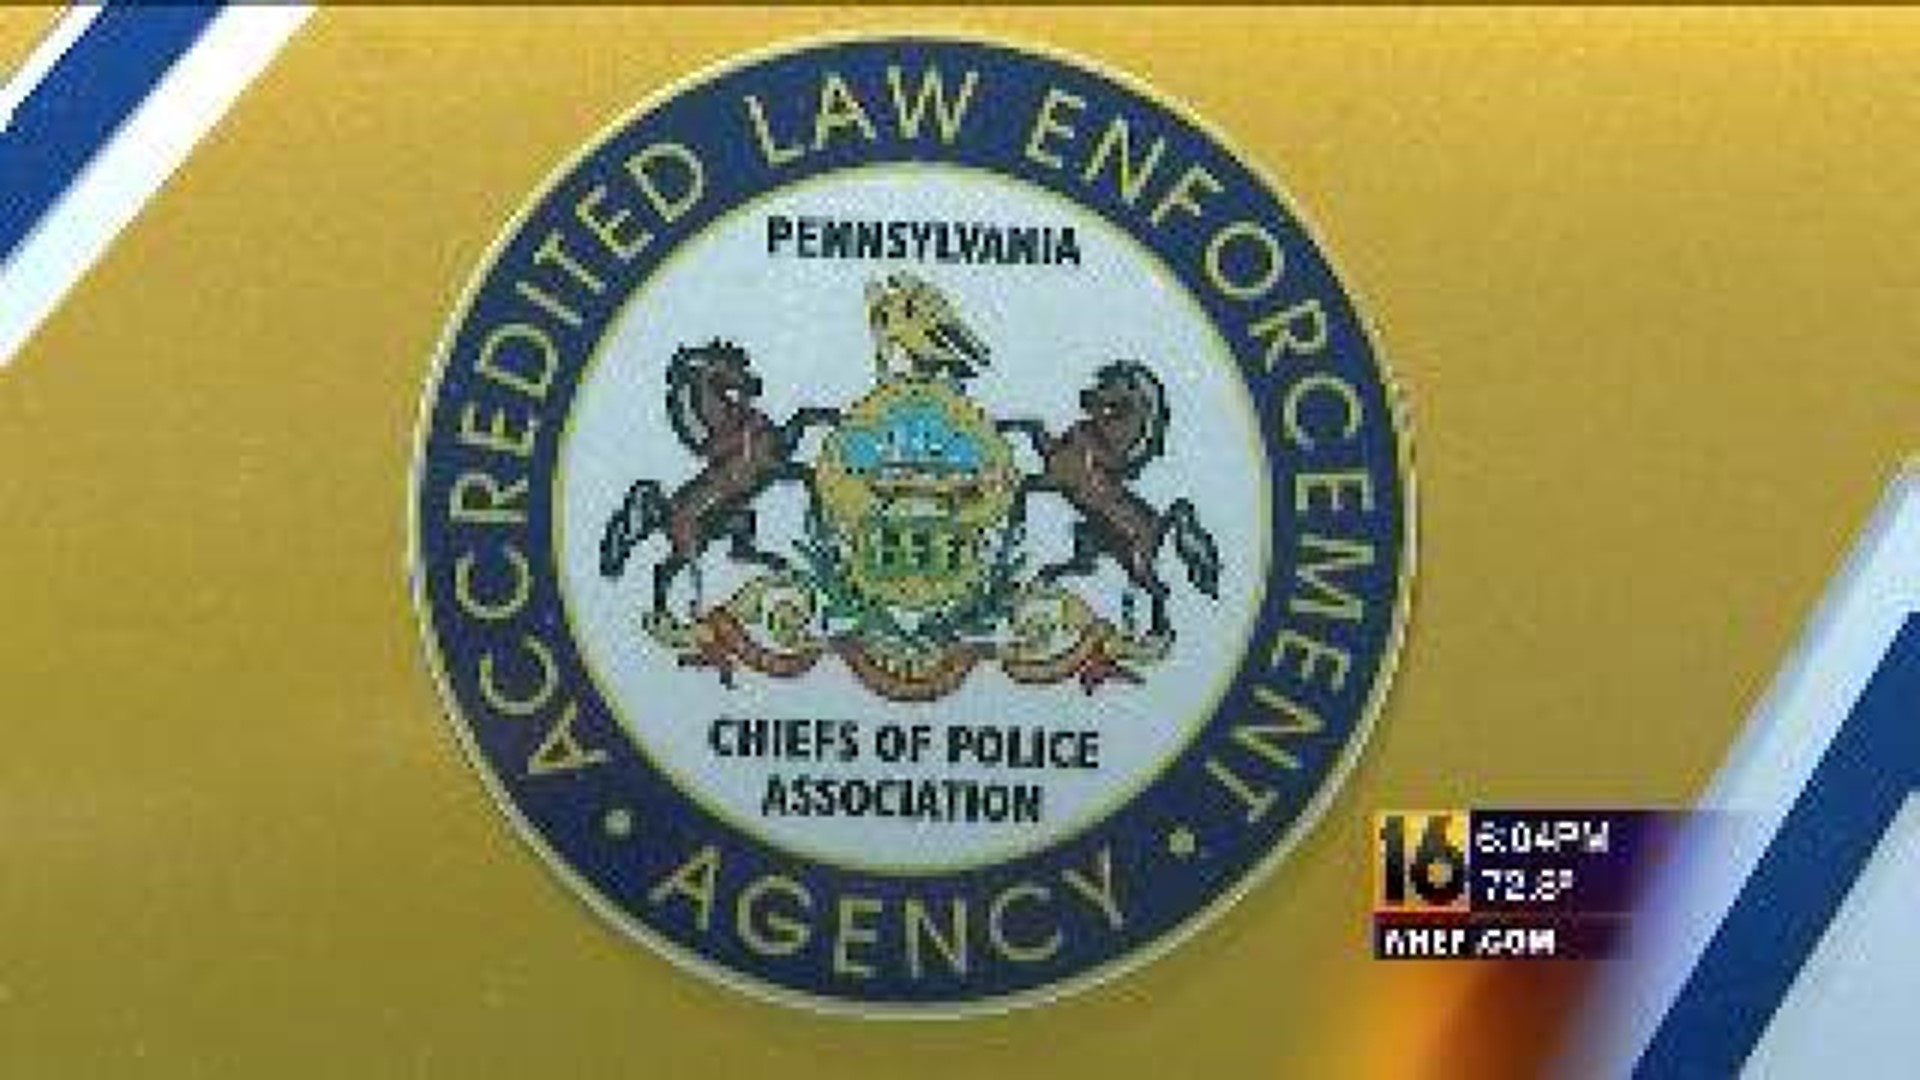 Old Forge Police Accreditation in Question